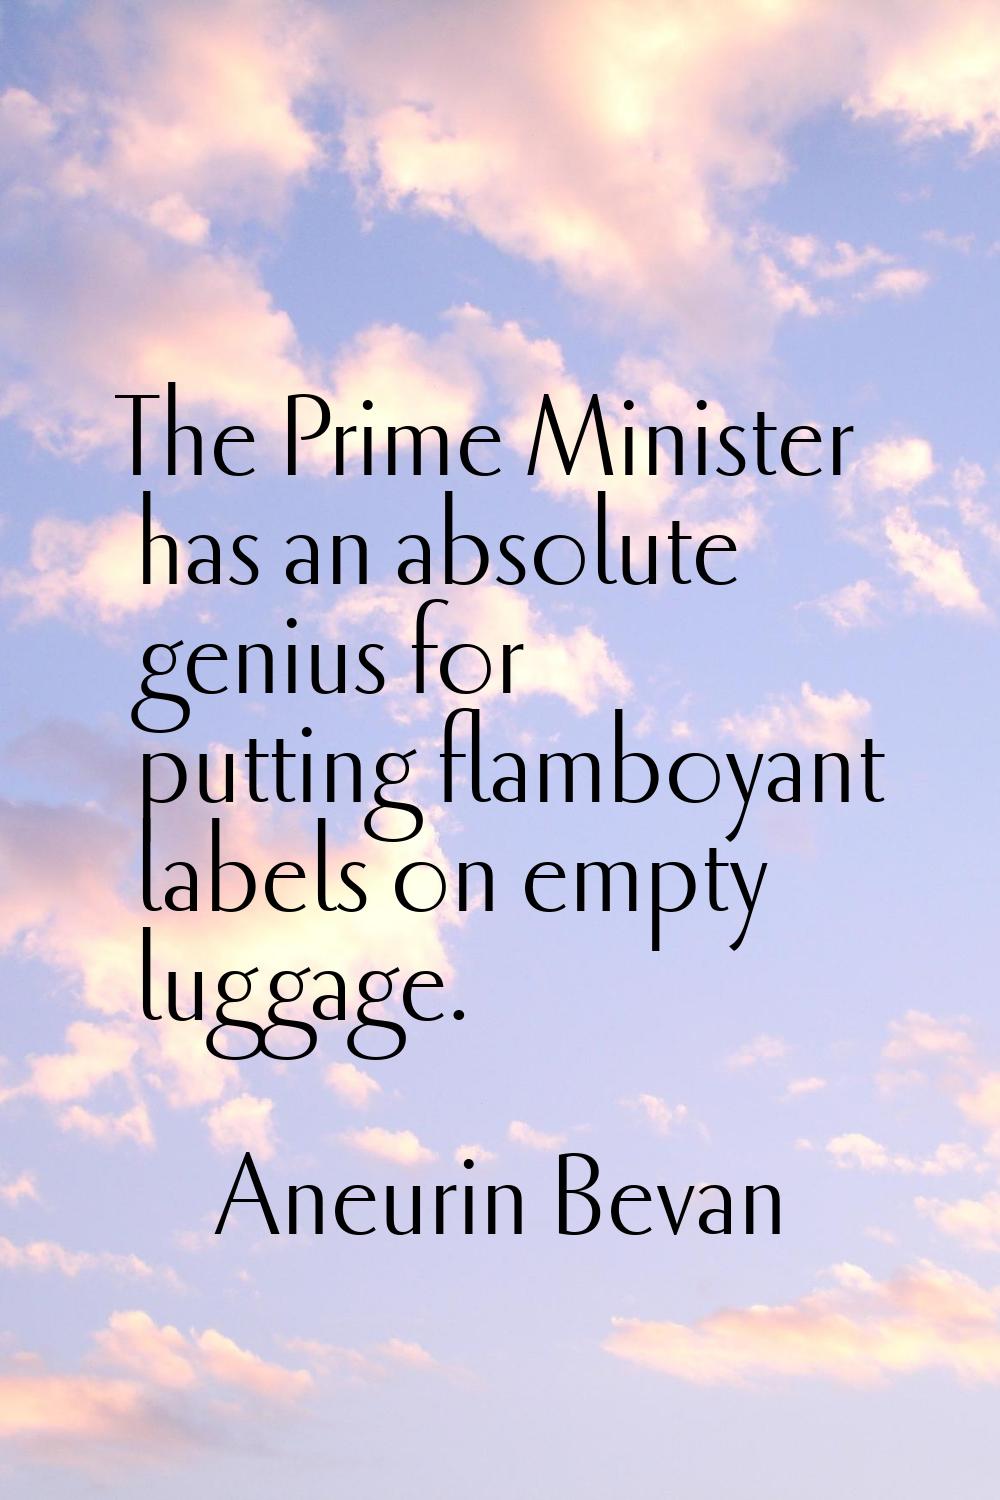 The Prime Minister has an absolute genius for putting flamboyant labels on empty luggage.